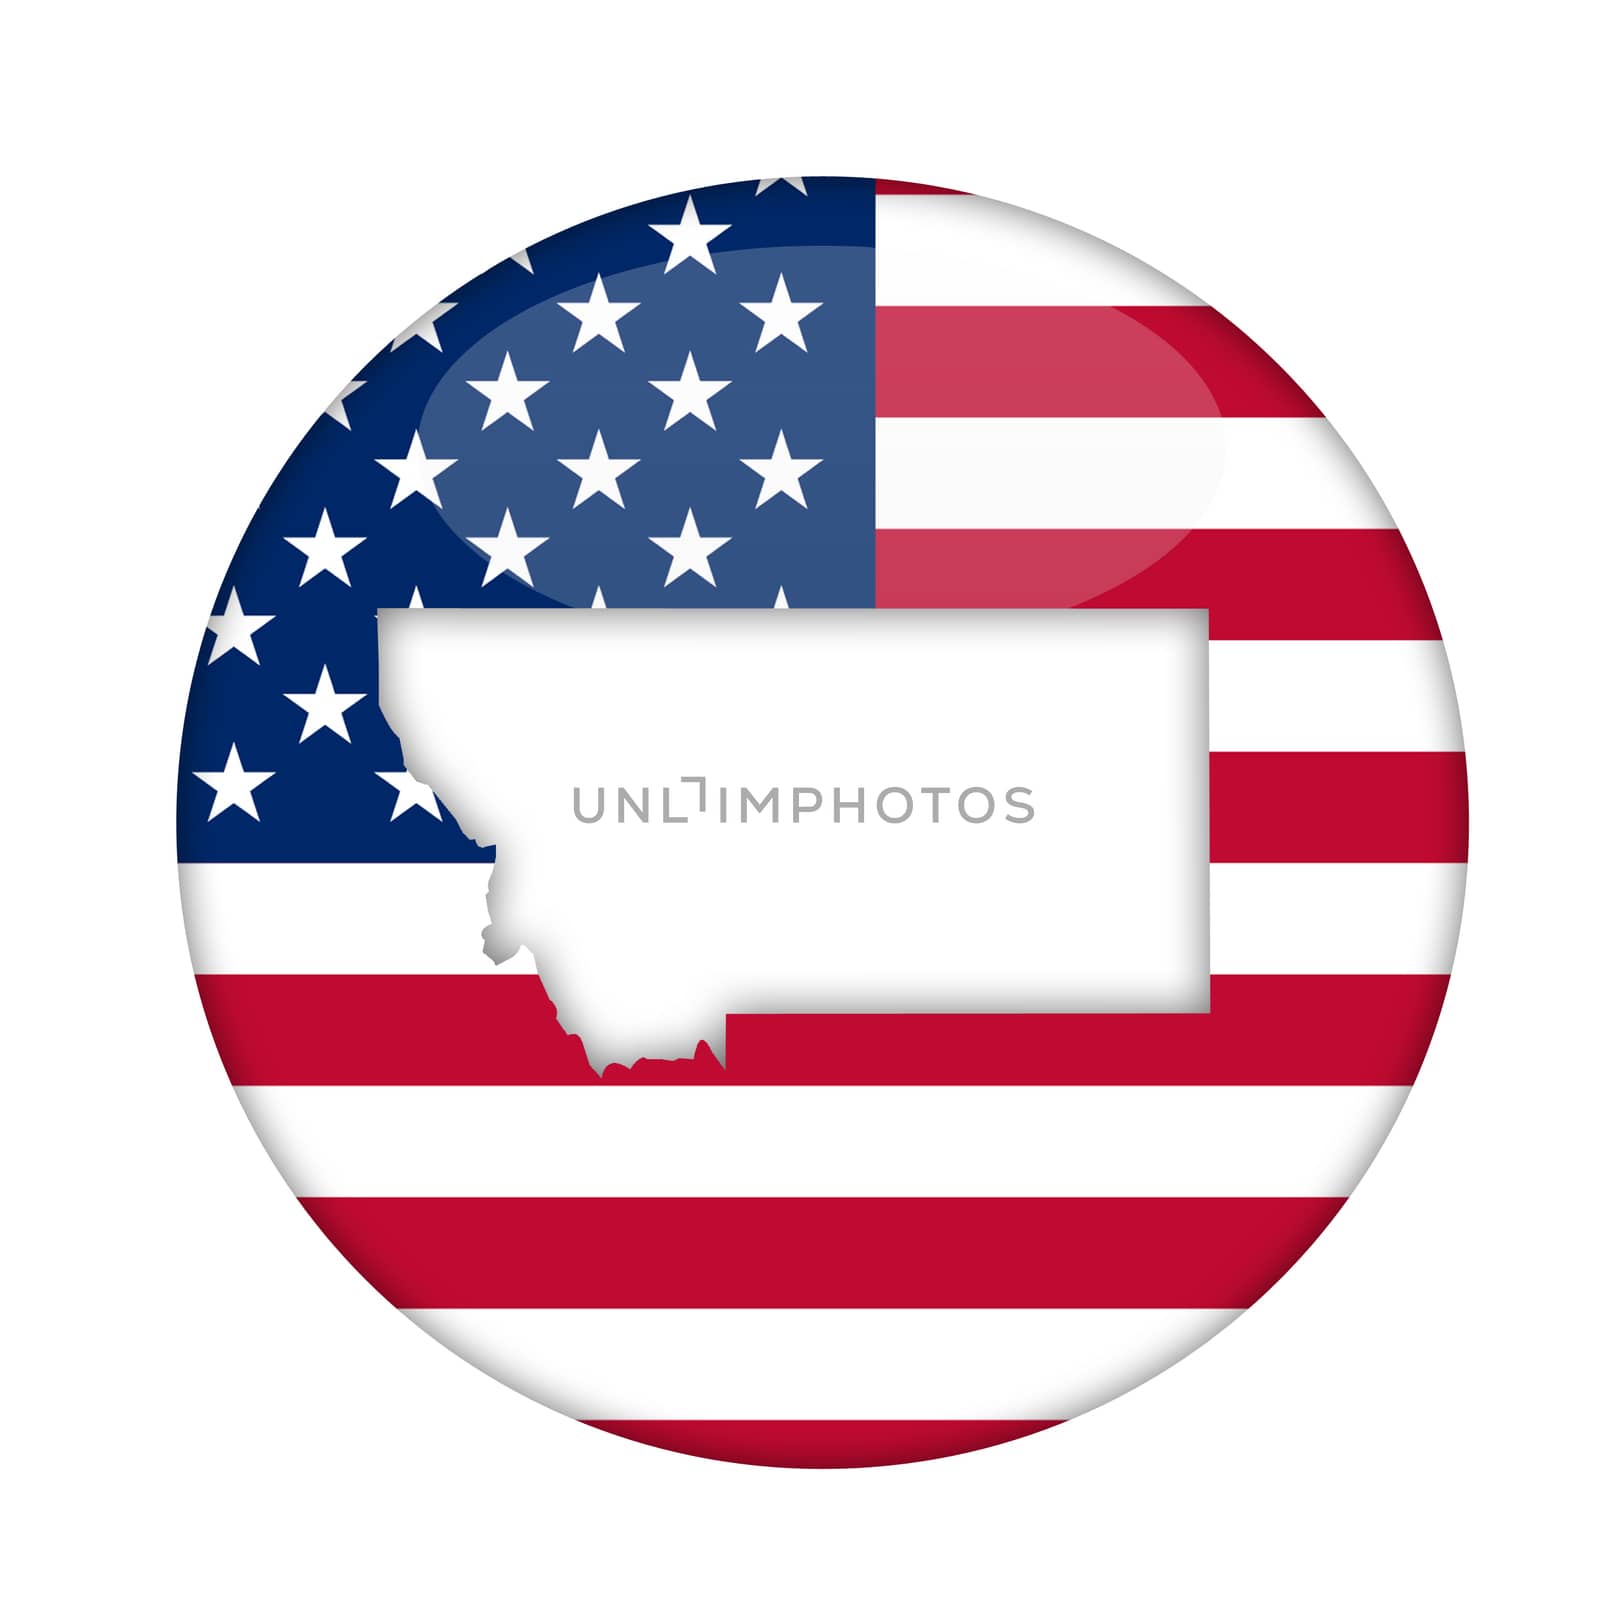 Montana state of America badge isolated on a white background.